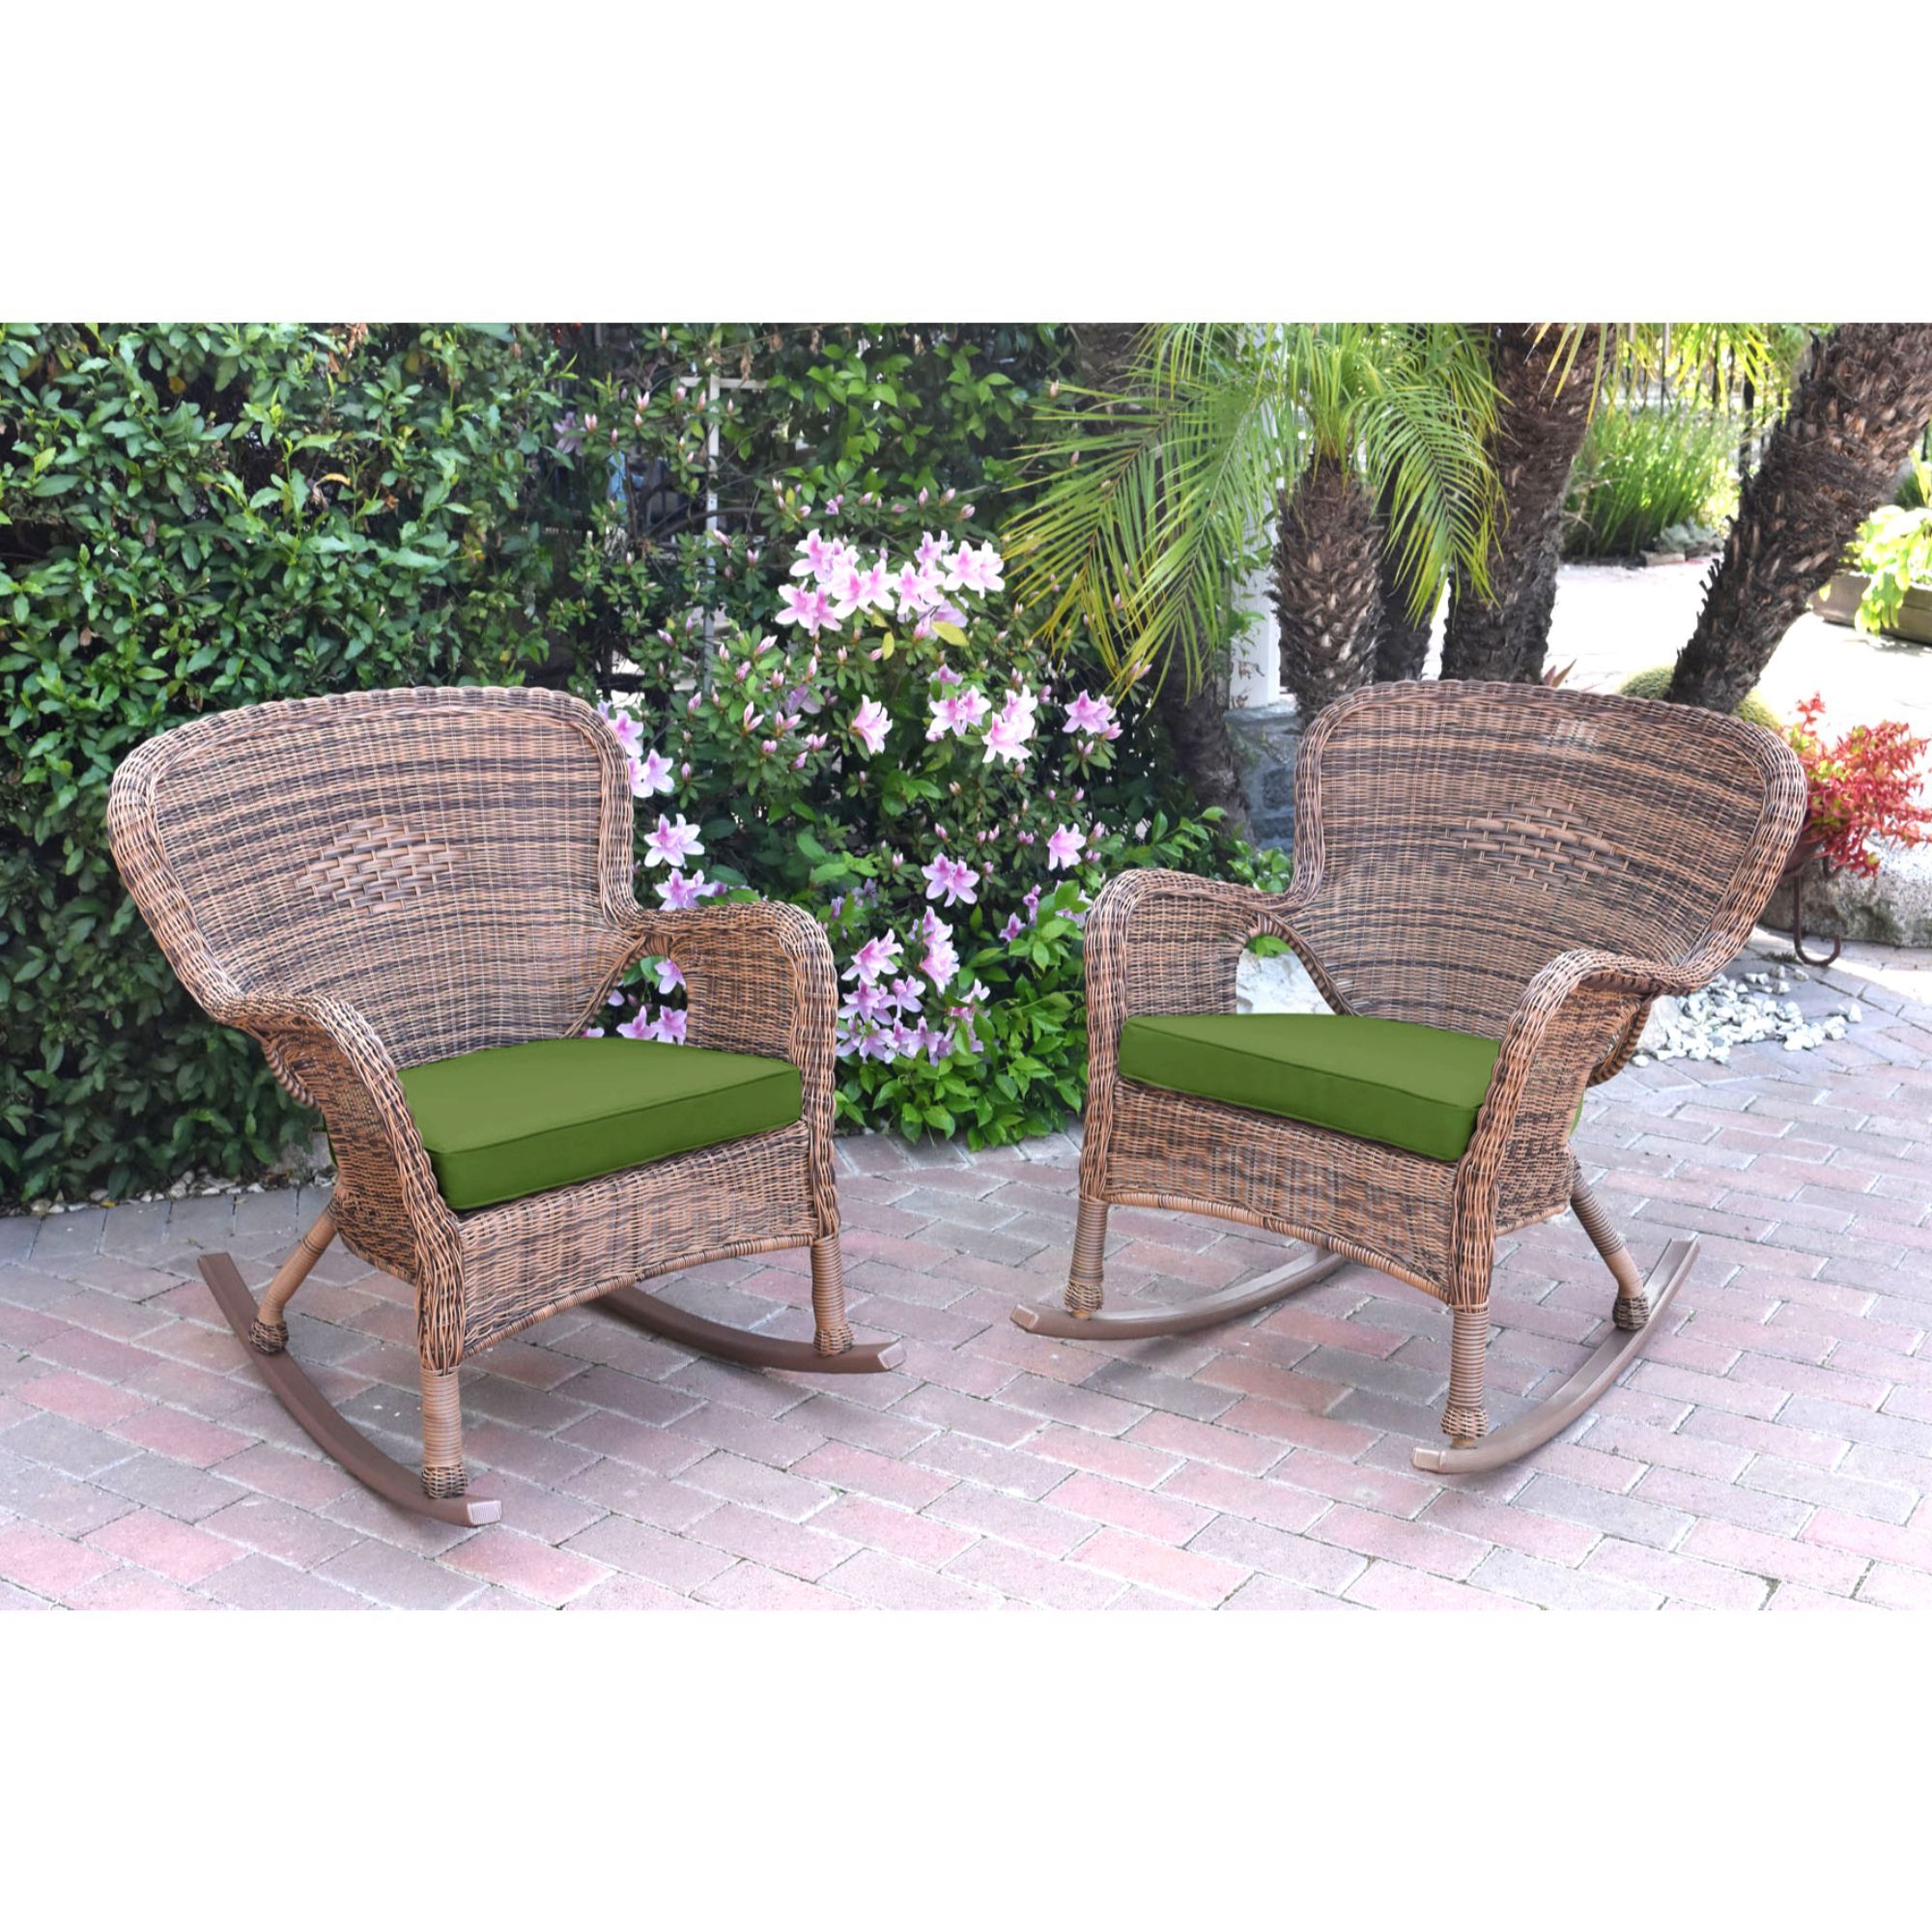 Widely Used Green Rattan Outdoor Rocking Chair Sets Inside Set Of 2 Brown And Green Windsor Outdoor Patio Wicker Chair And (View 1 of 15)